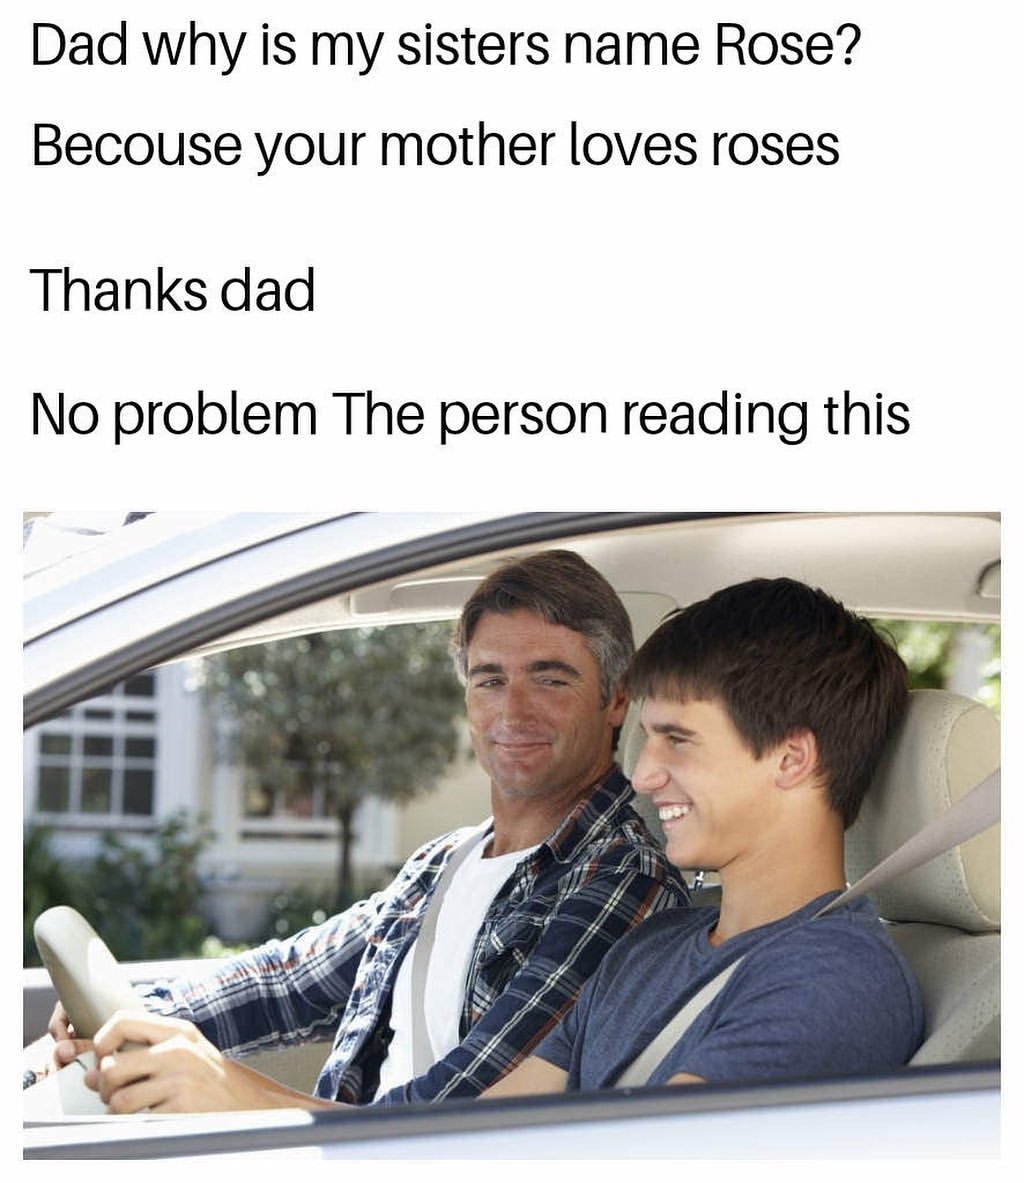 Dad why is my sisters name Rose? Because your mother loves roses. Thanks dad. No problem the person reading this.